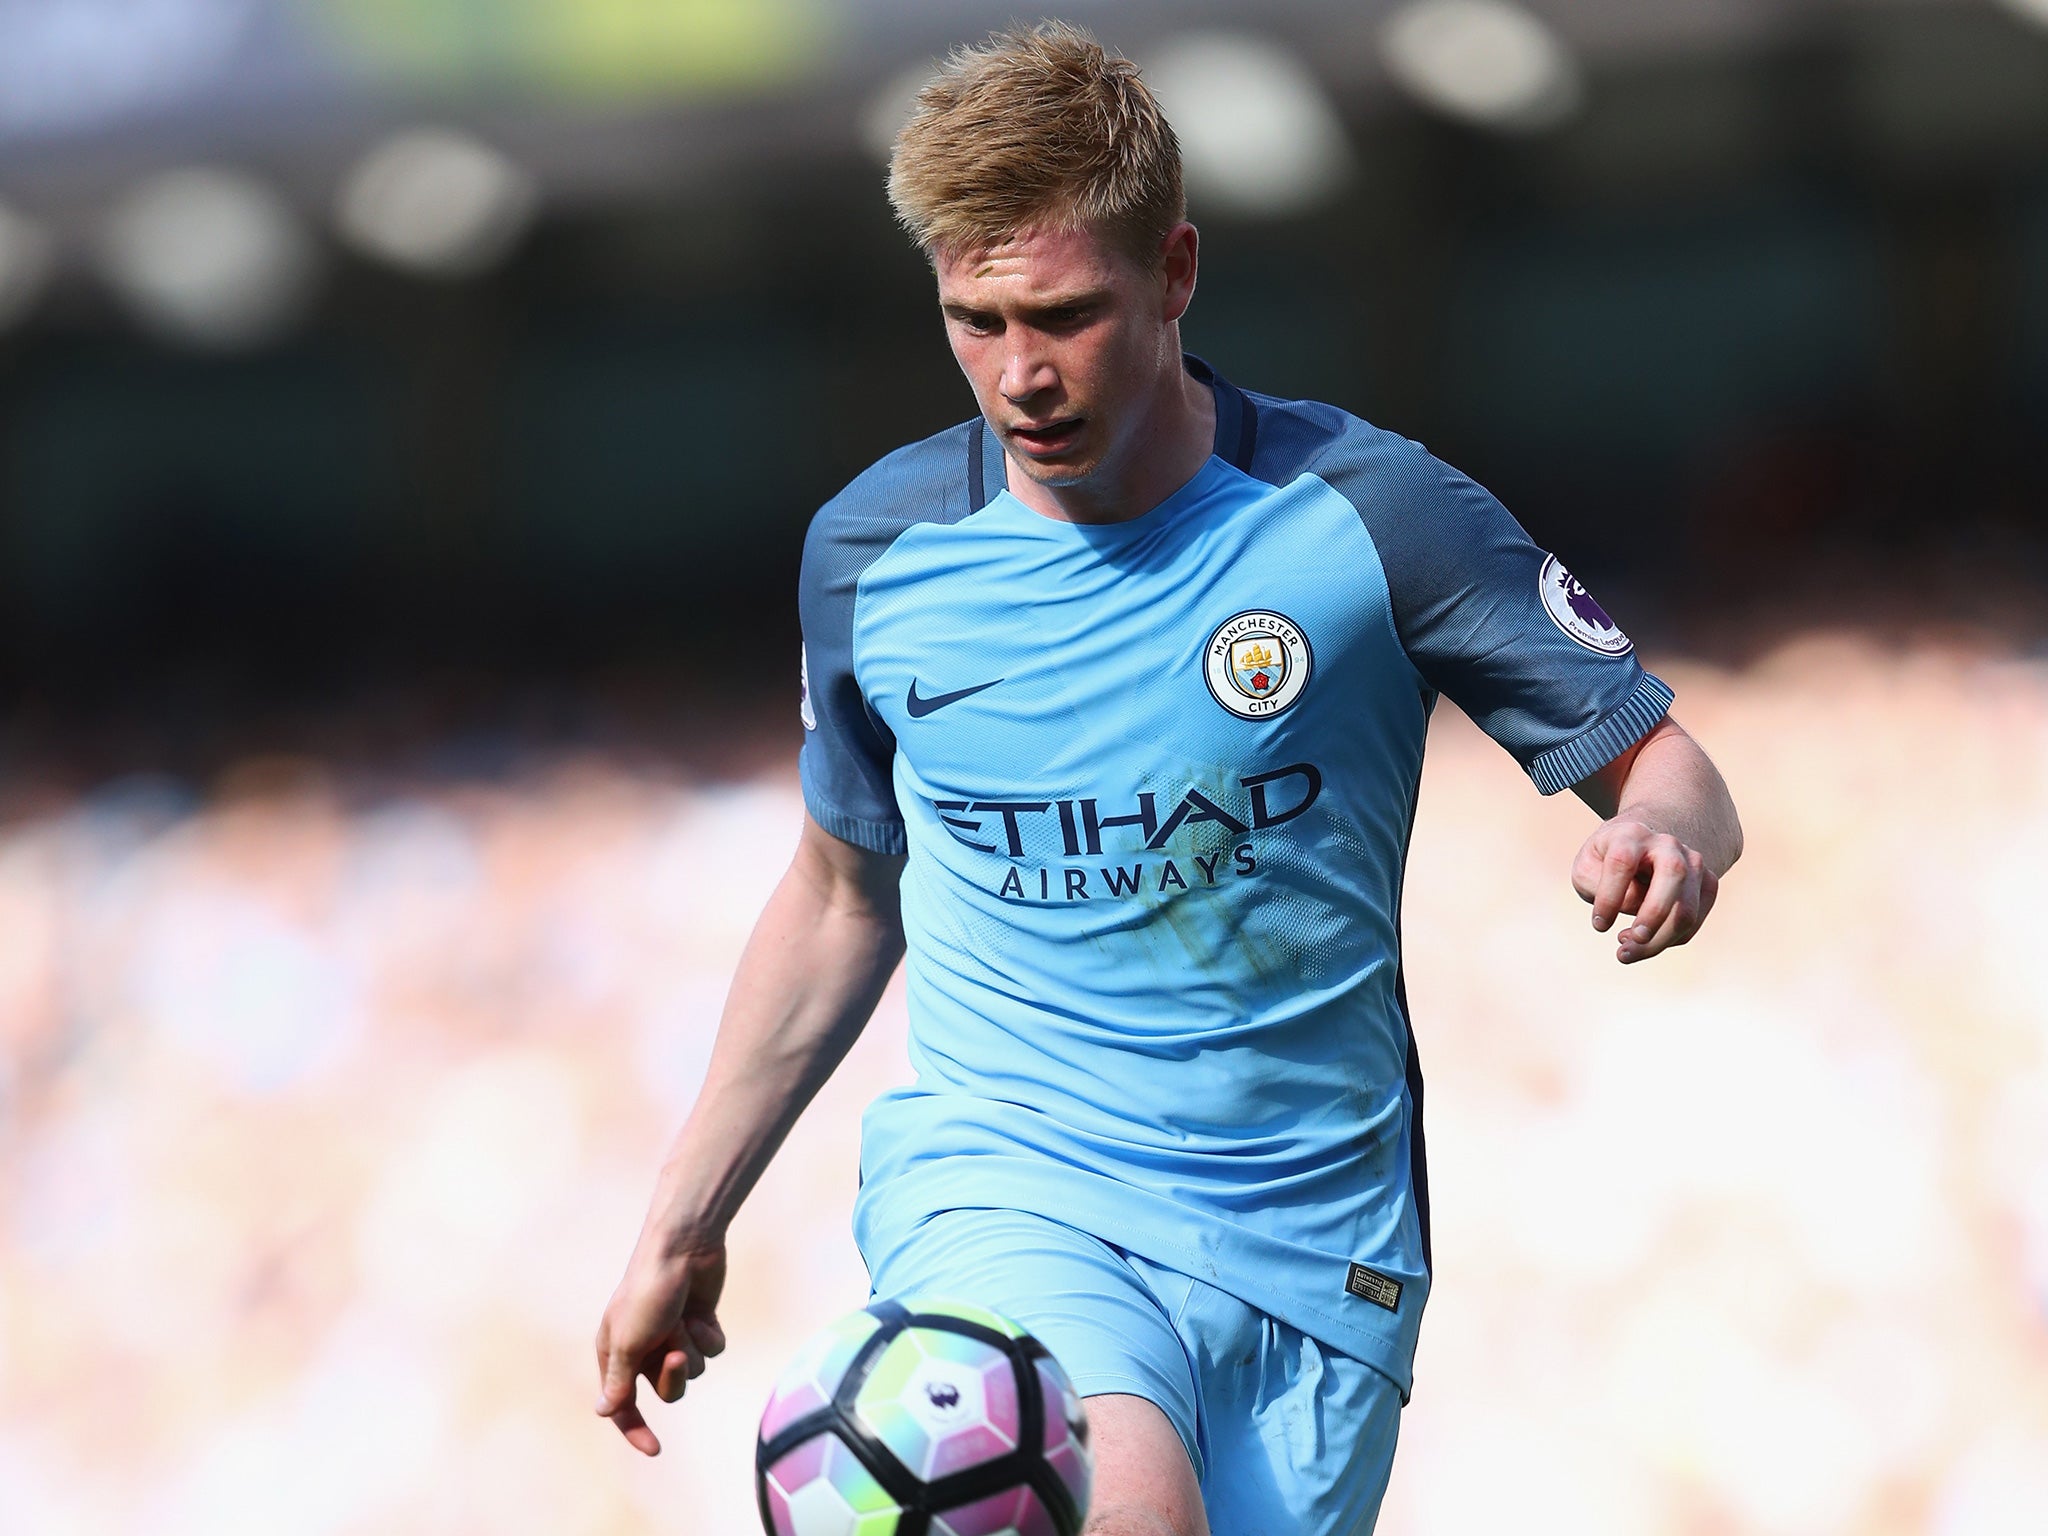 De Bruyne has made an excellent start to the season